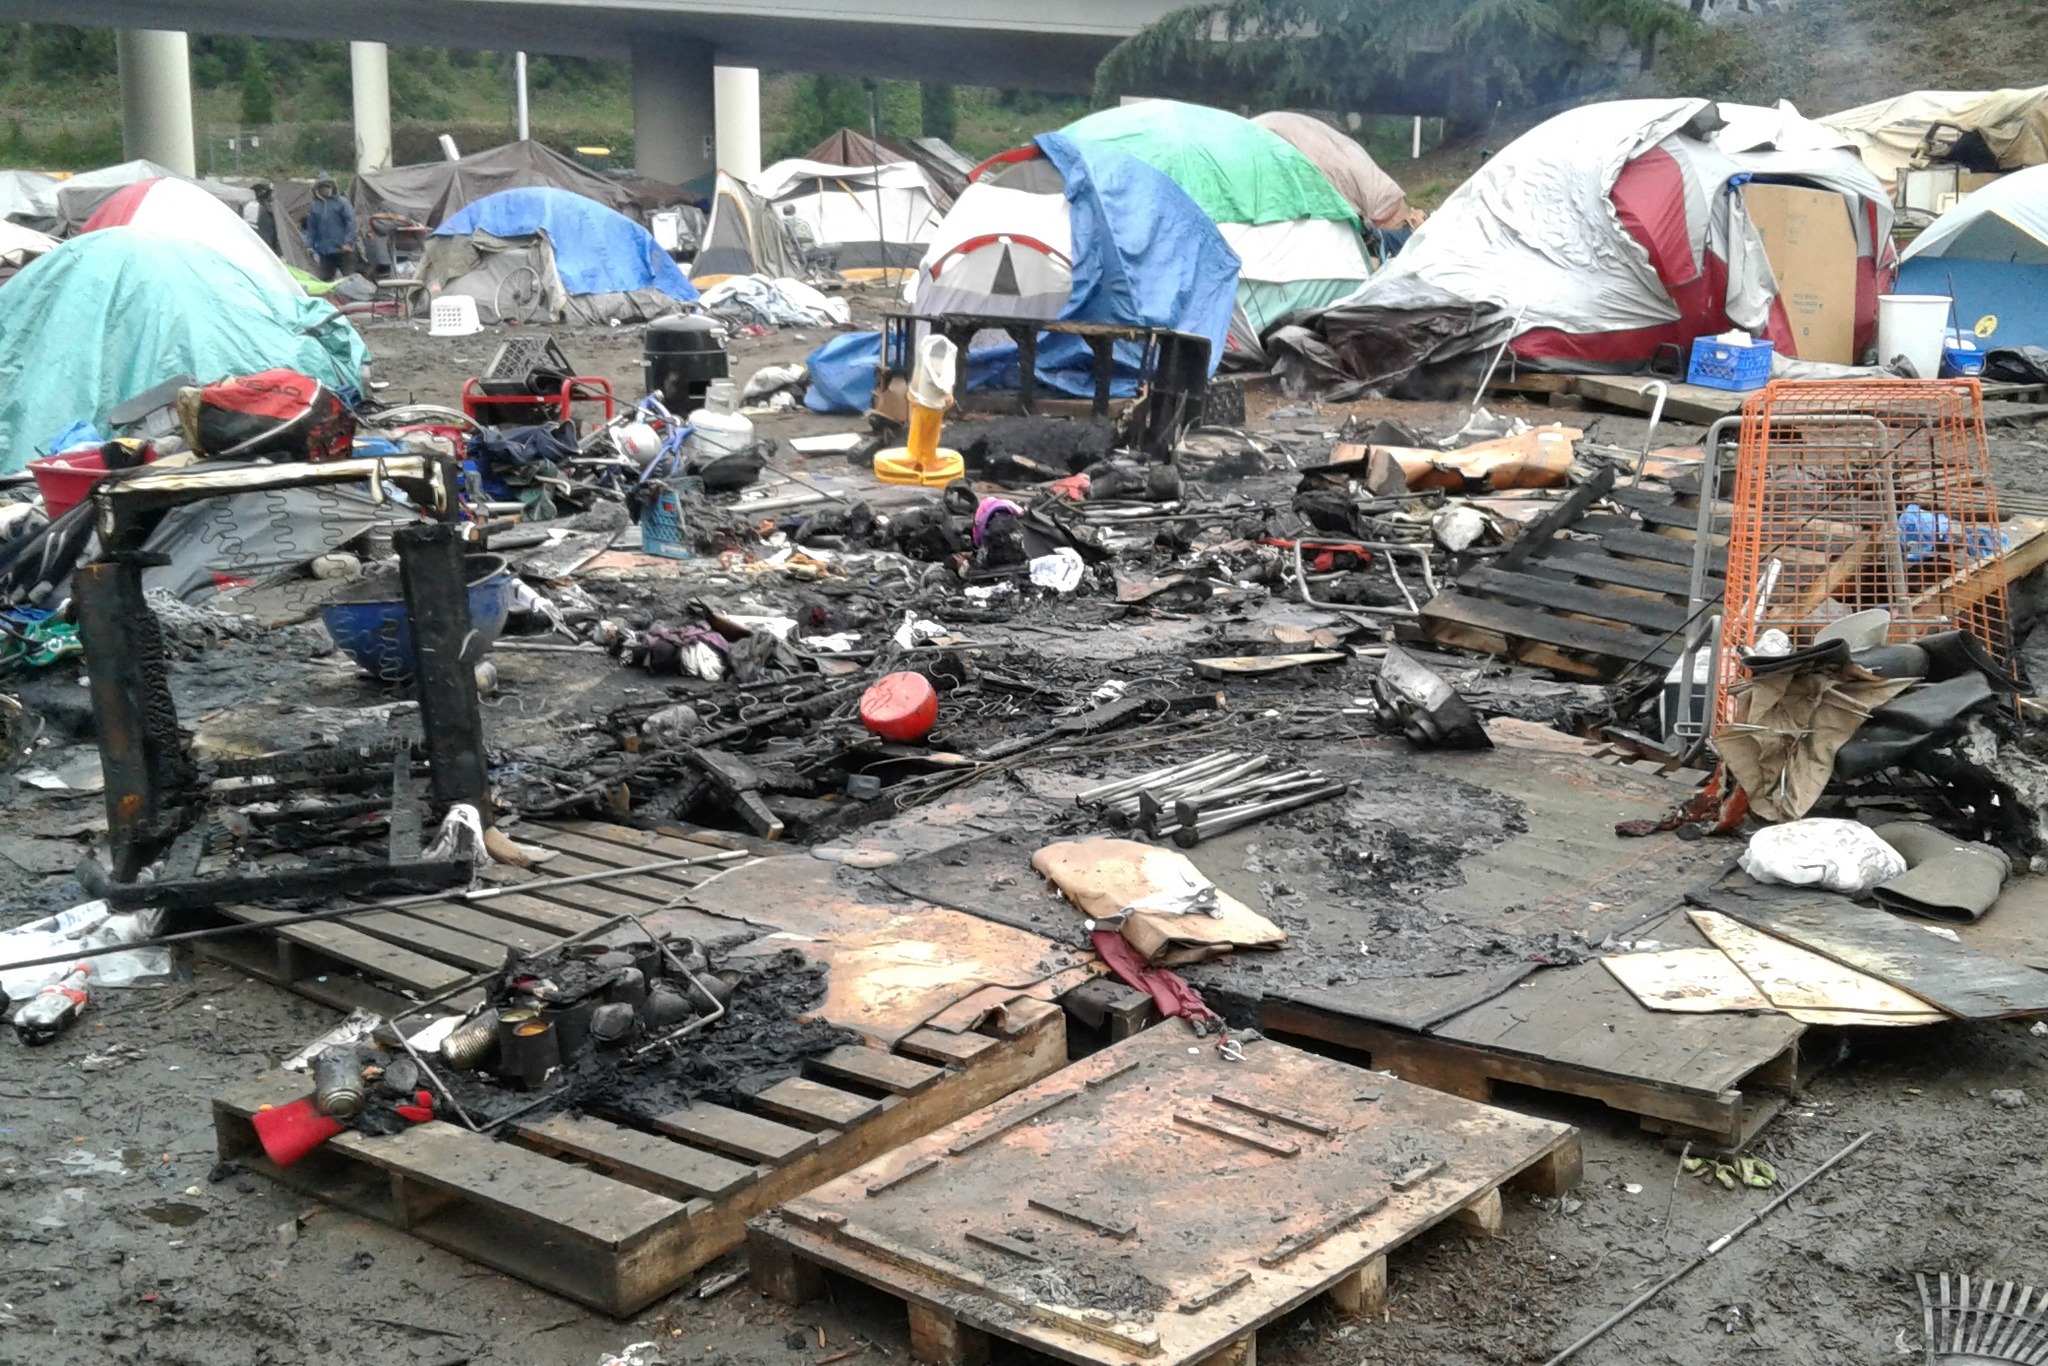 The remains of a fire at the Field homeless encampment on February 11, 2017. Photo by Cory Potts.